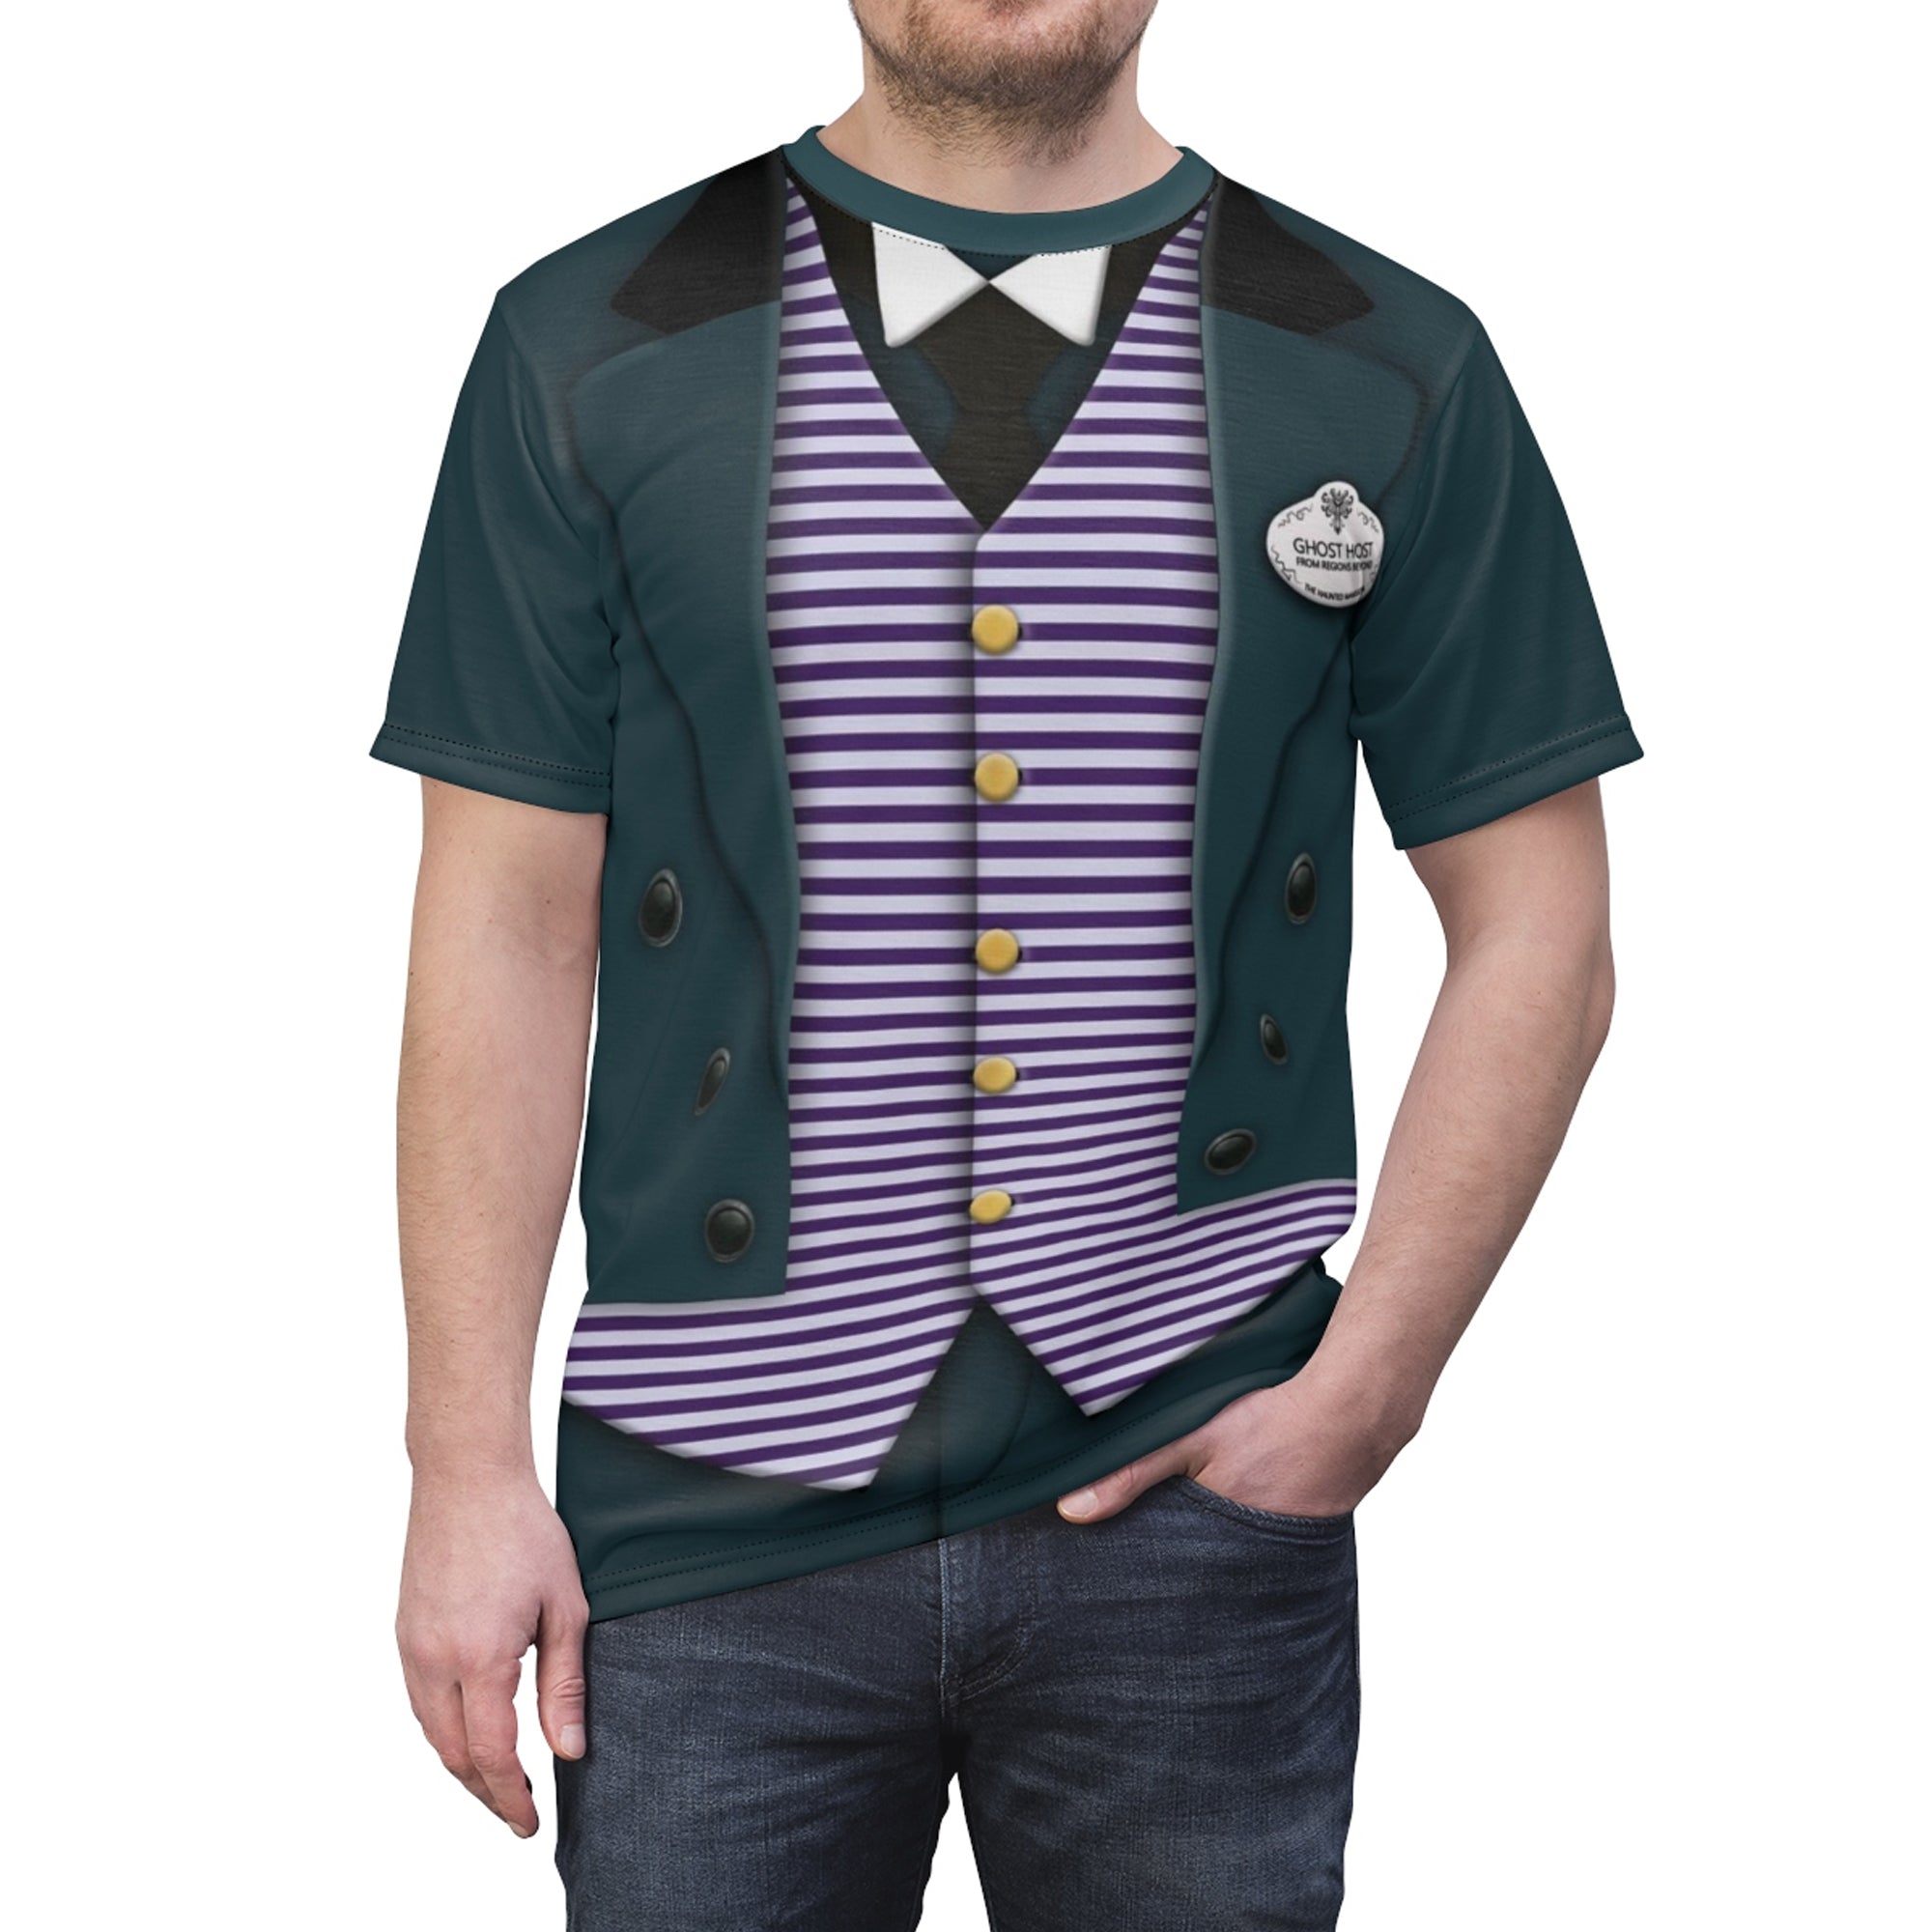 Butler Haunted Mansion Costume Cosplay - T-Shirt